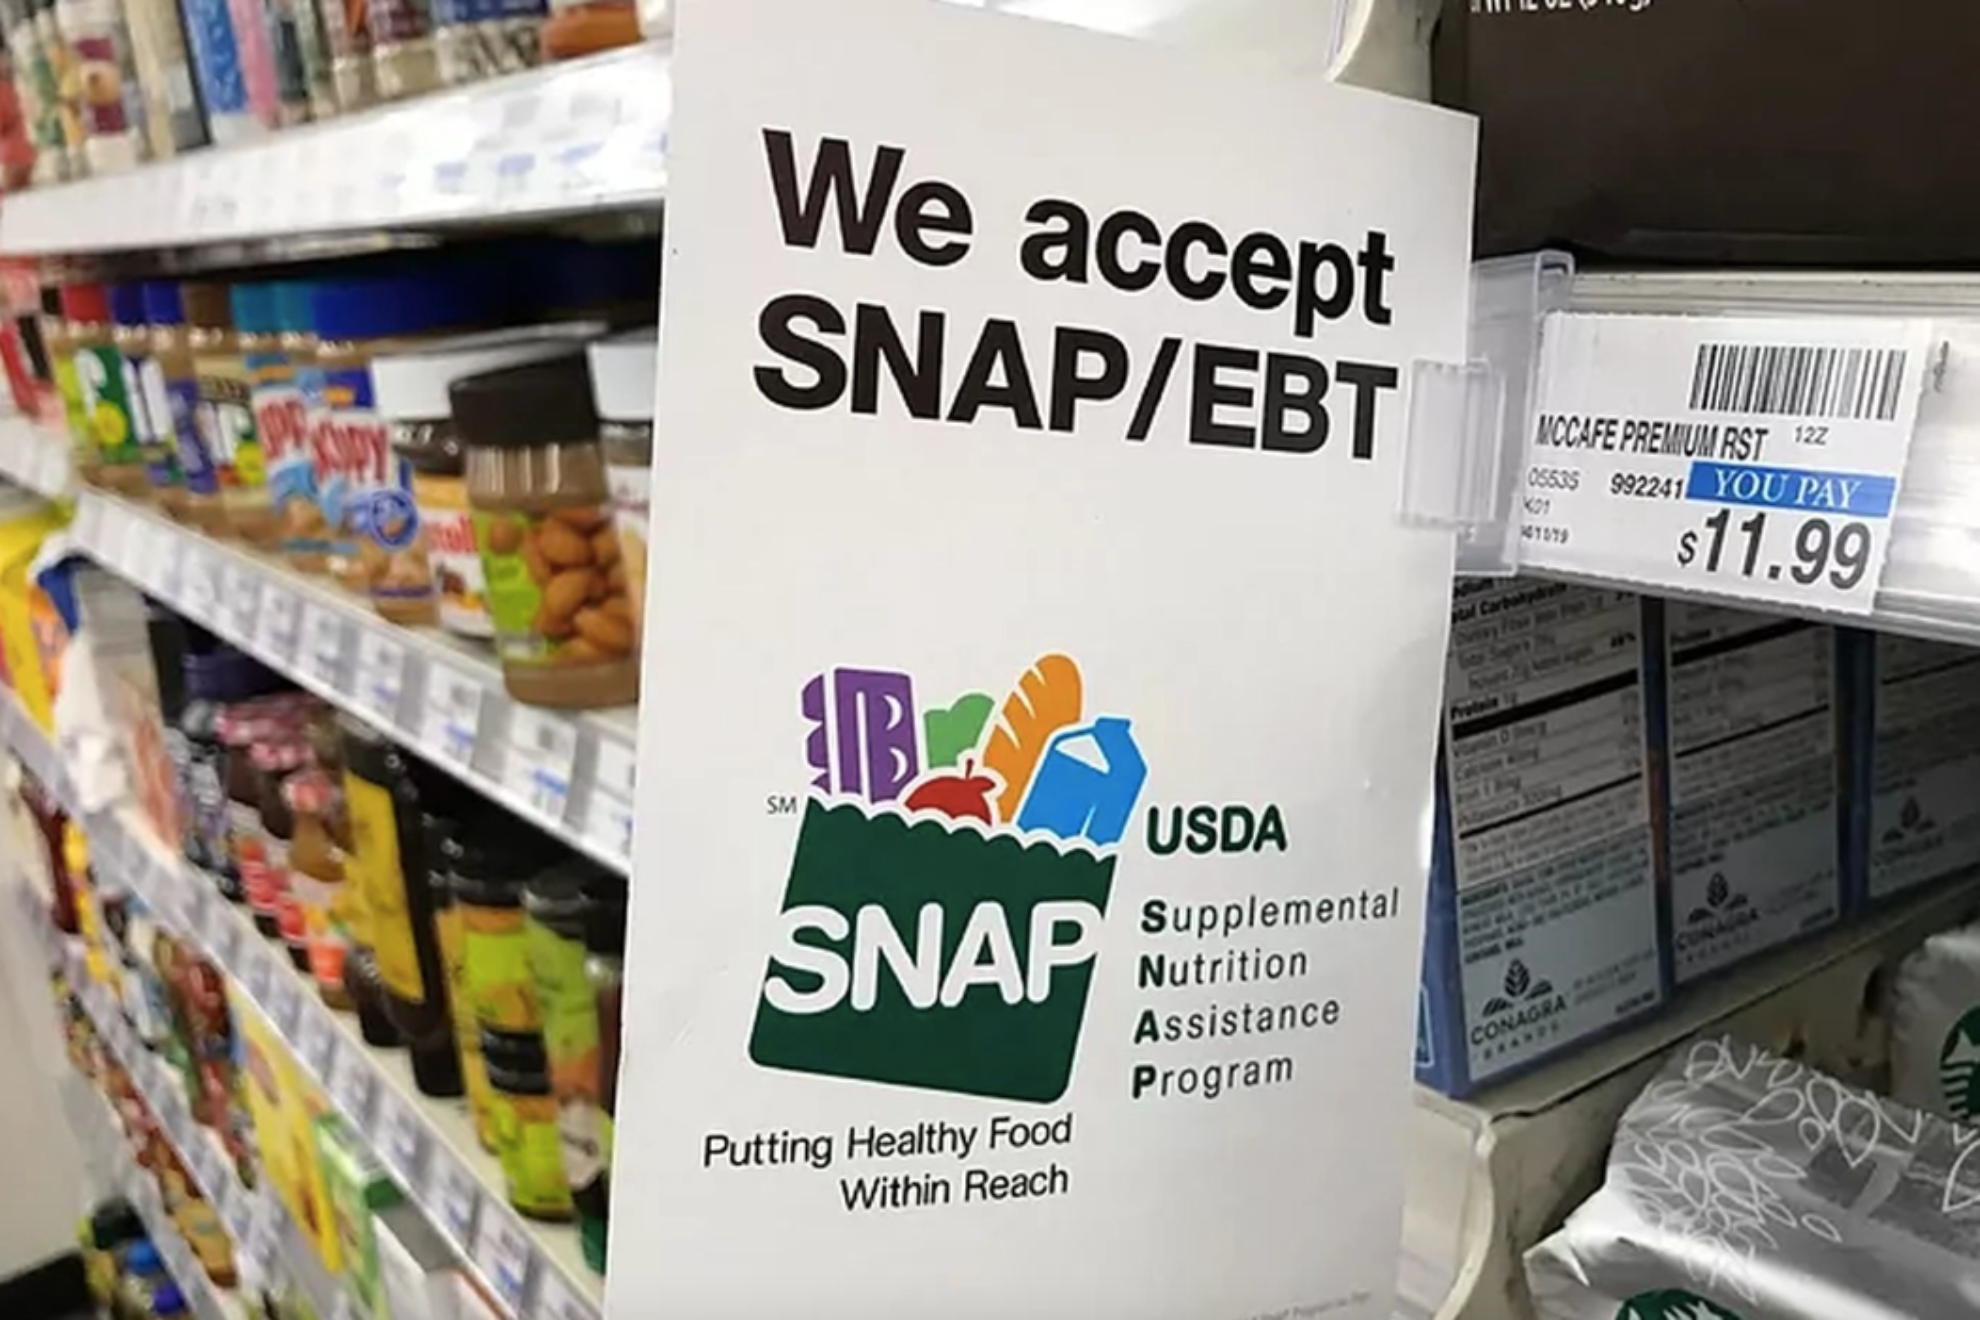 Florida SNAP Payment February: Are you getting your payment this week? Find out here